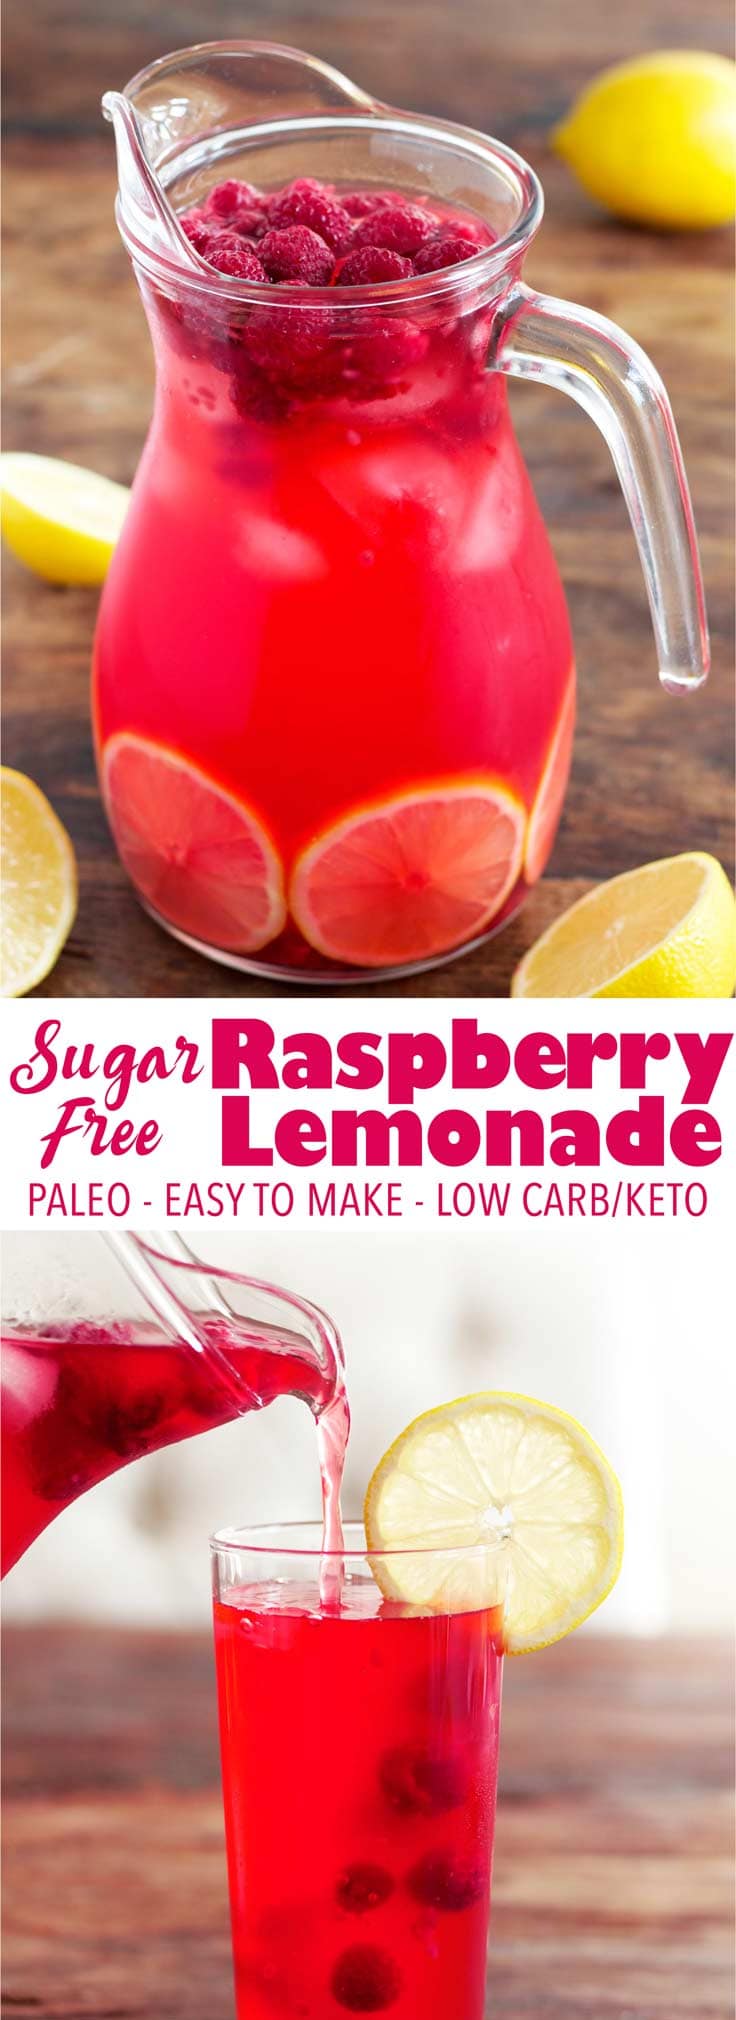 Less than 5 minutes to make, 35 calories per serving, no sketchy ingredients, and loaded with vitamin C! Low carb/keto, paleo, vegan.